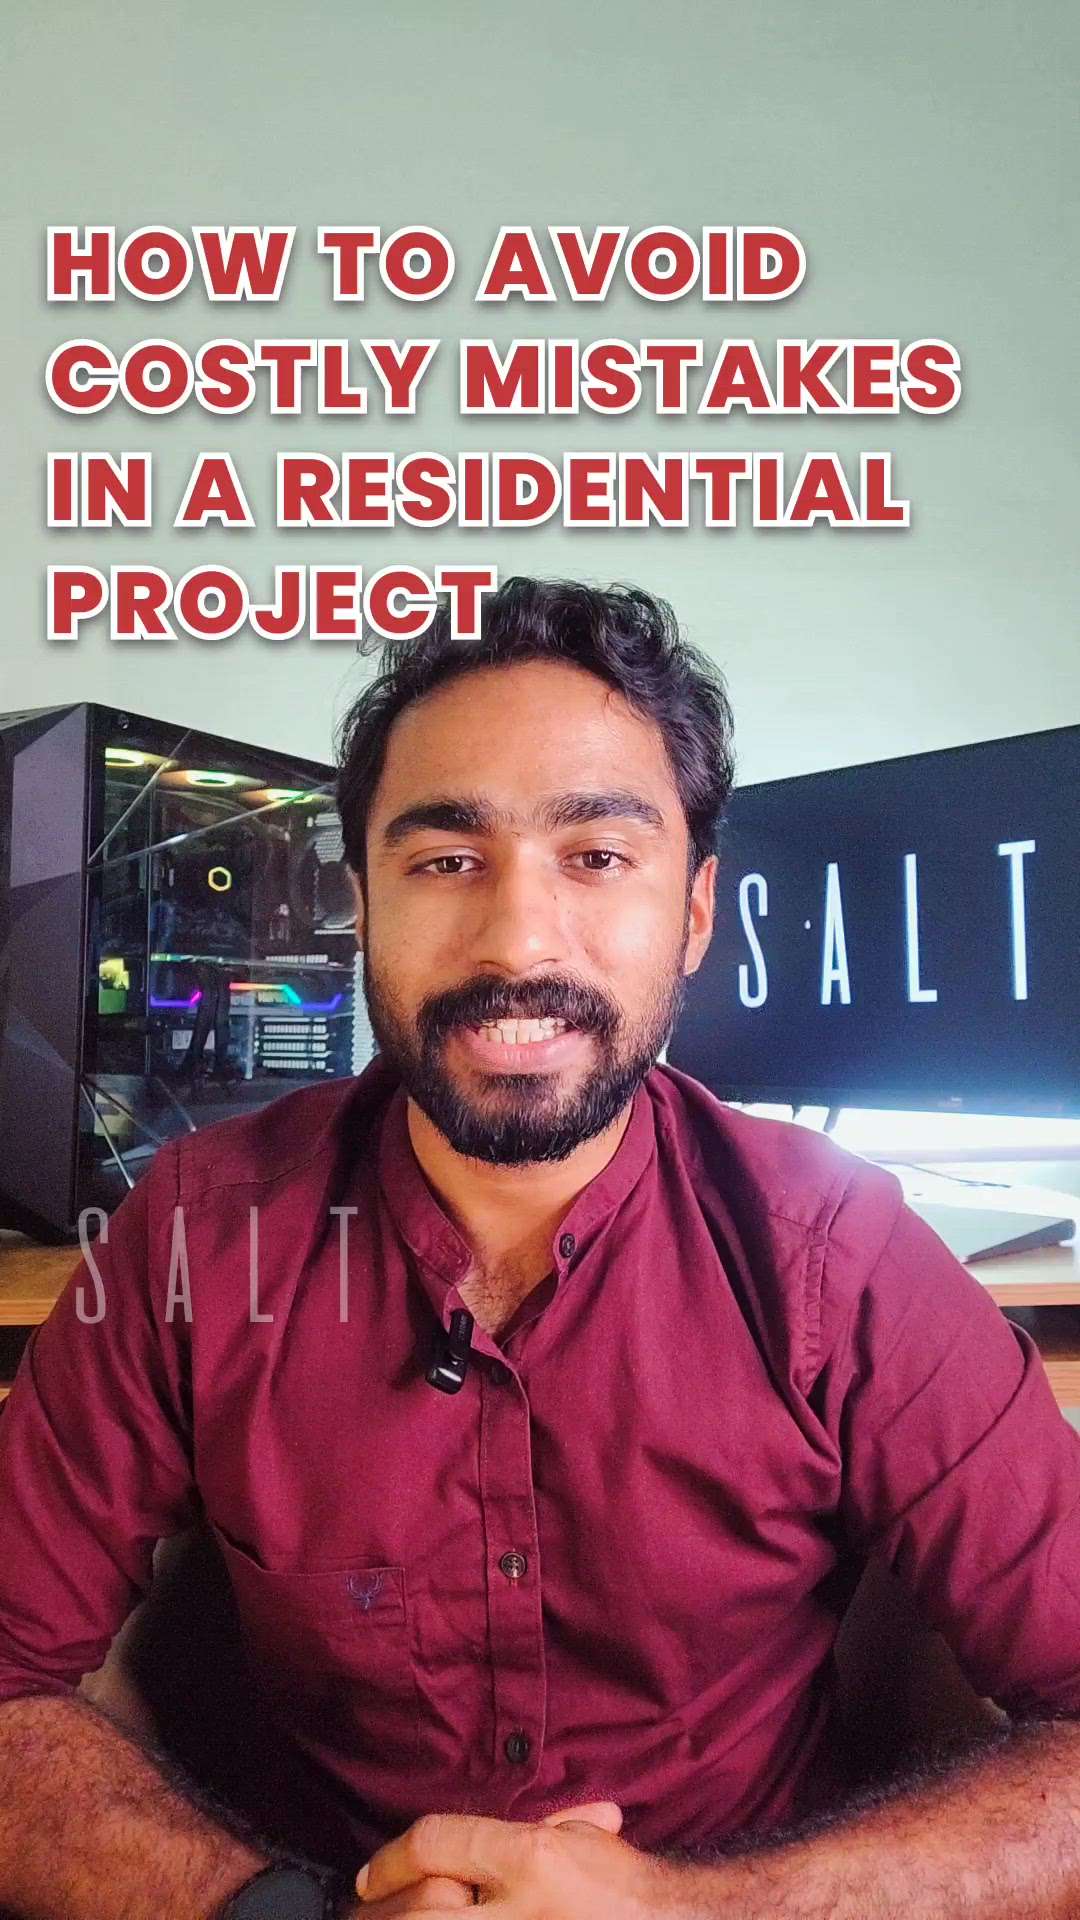 How to Avoid Costly Mistakes in a Residential Project 
.
.
.
.
.
.
.
.
#salt #saltdesign #saltconstruction #saltarchitects #saltdesigners #saltarchitecture #architecturaltips #architecturetoday #architecturedesigns #architecturedesign #architecture #architecturetool #architecturetools #architecturetoolkits #toparchitects #keralagram #keralaarchitecture #keralaarchitects #floorplans #betterarchitects #betterarchitecture #tools #toolsofarchitecture #tips #tipsofarchitecture #famousarchitecture #famousarchitects #kollam #kasaragod #Kozhikode